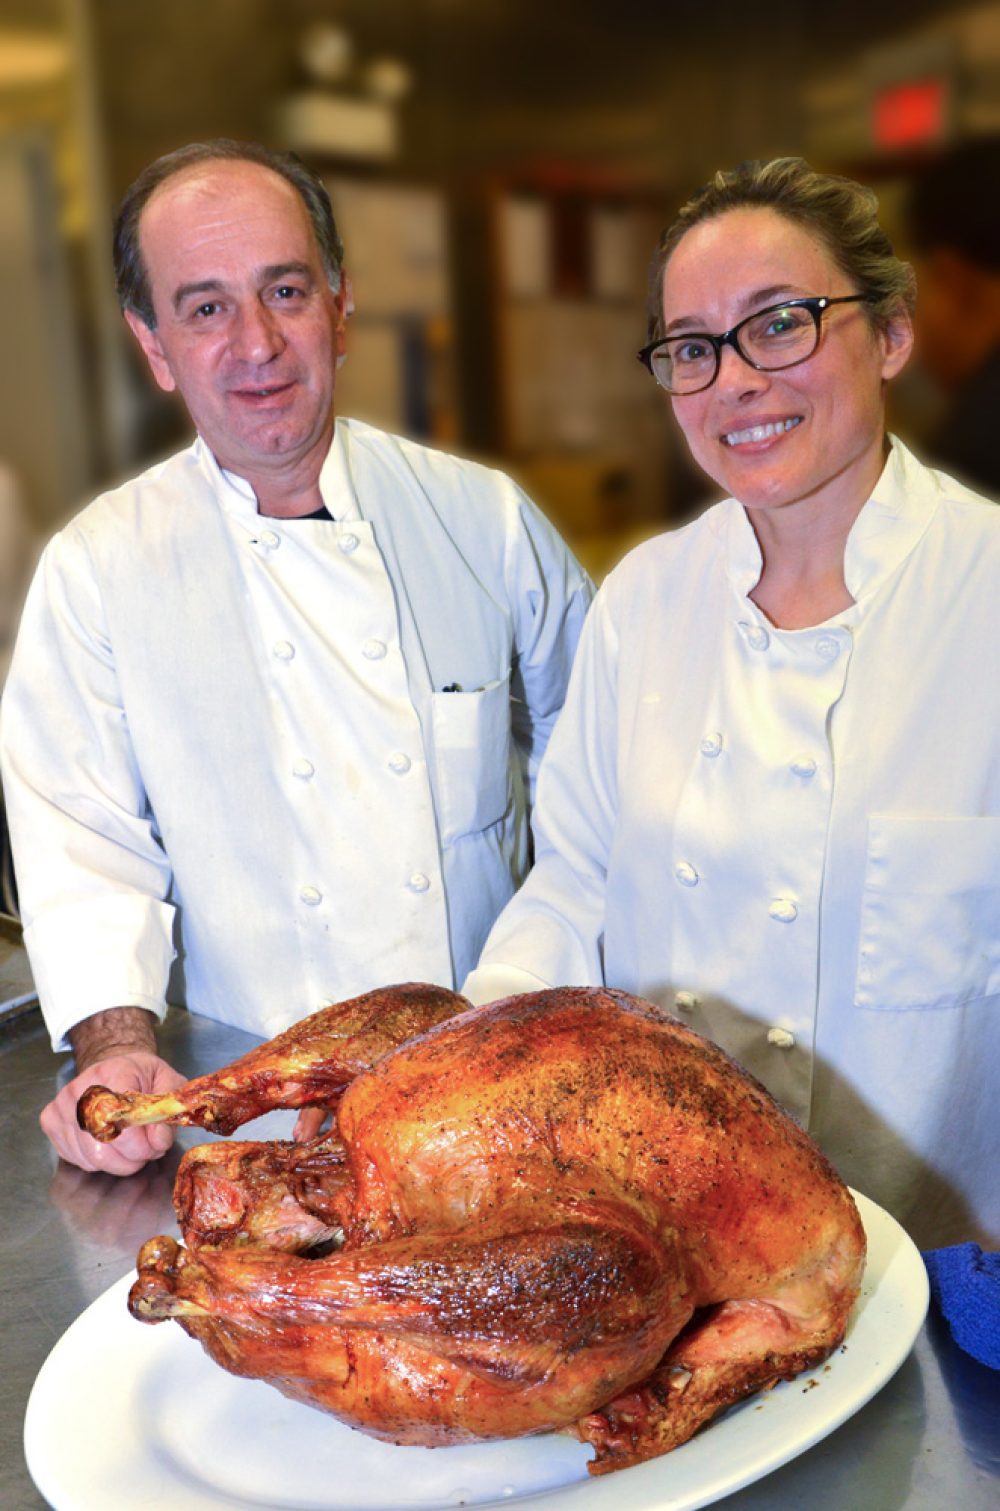 Chefs George Bumbaris and Sarah Stegner co-owners of Prairie Grass Cafe